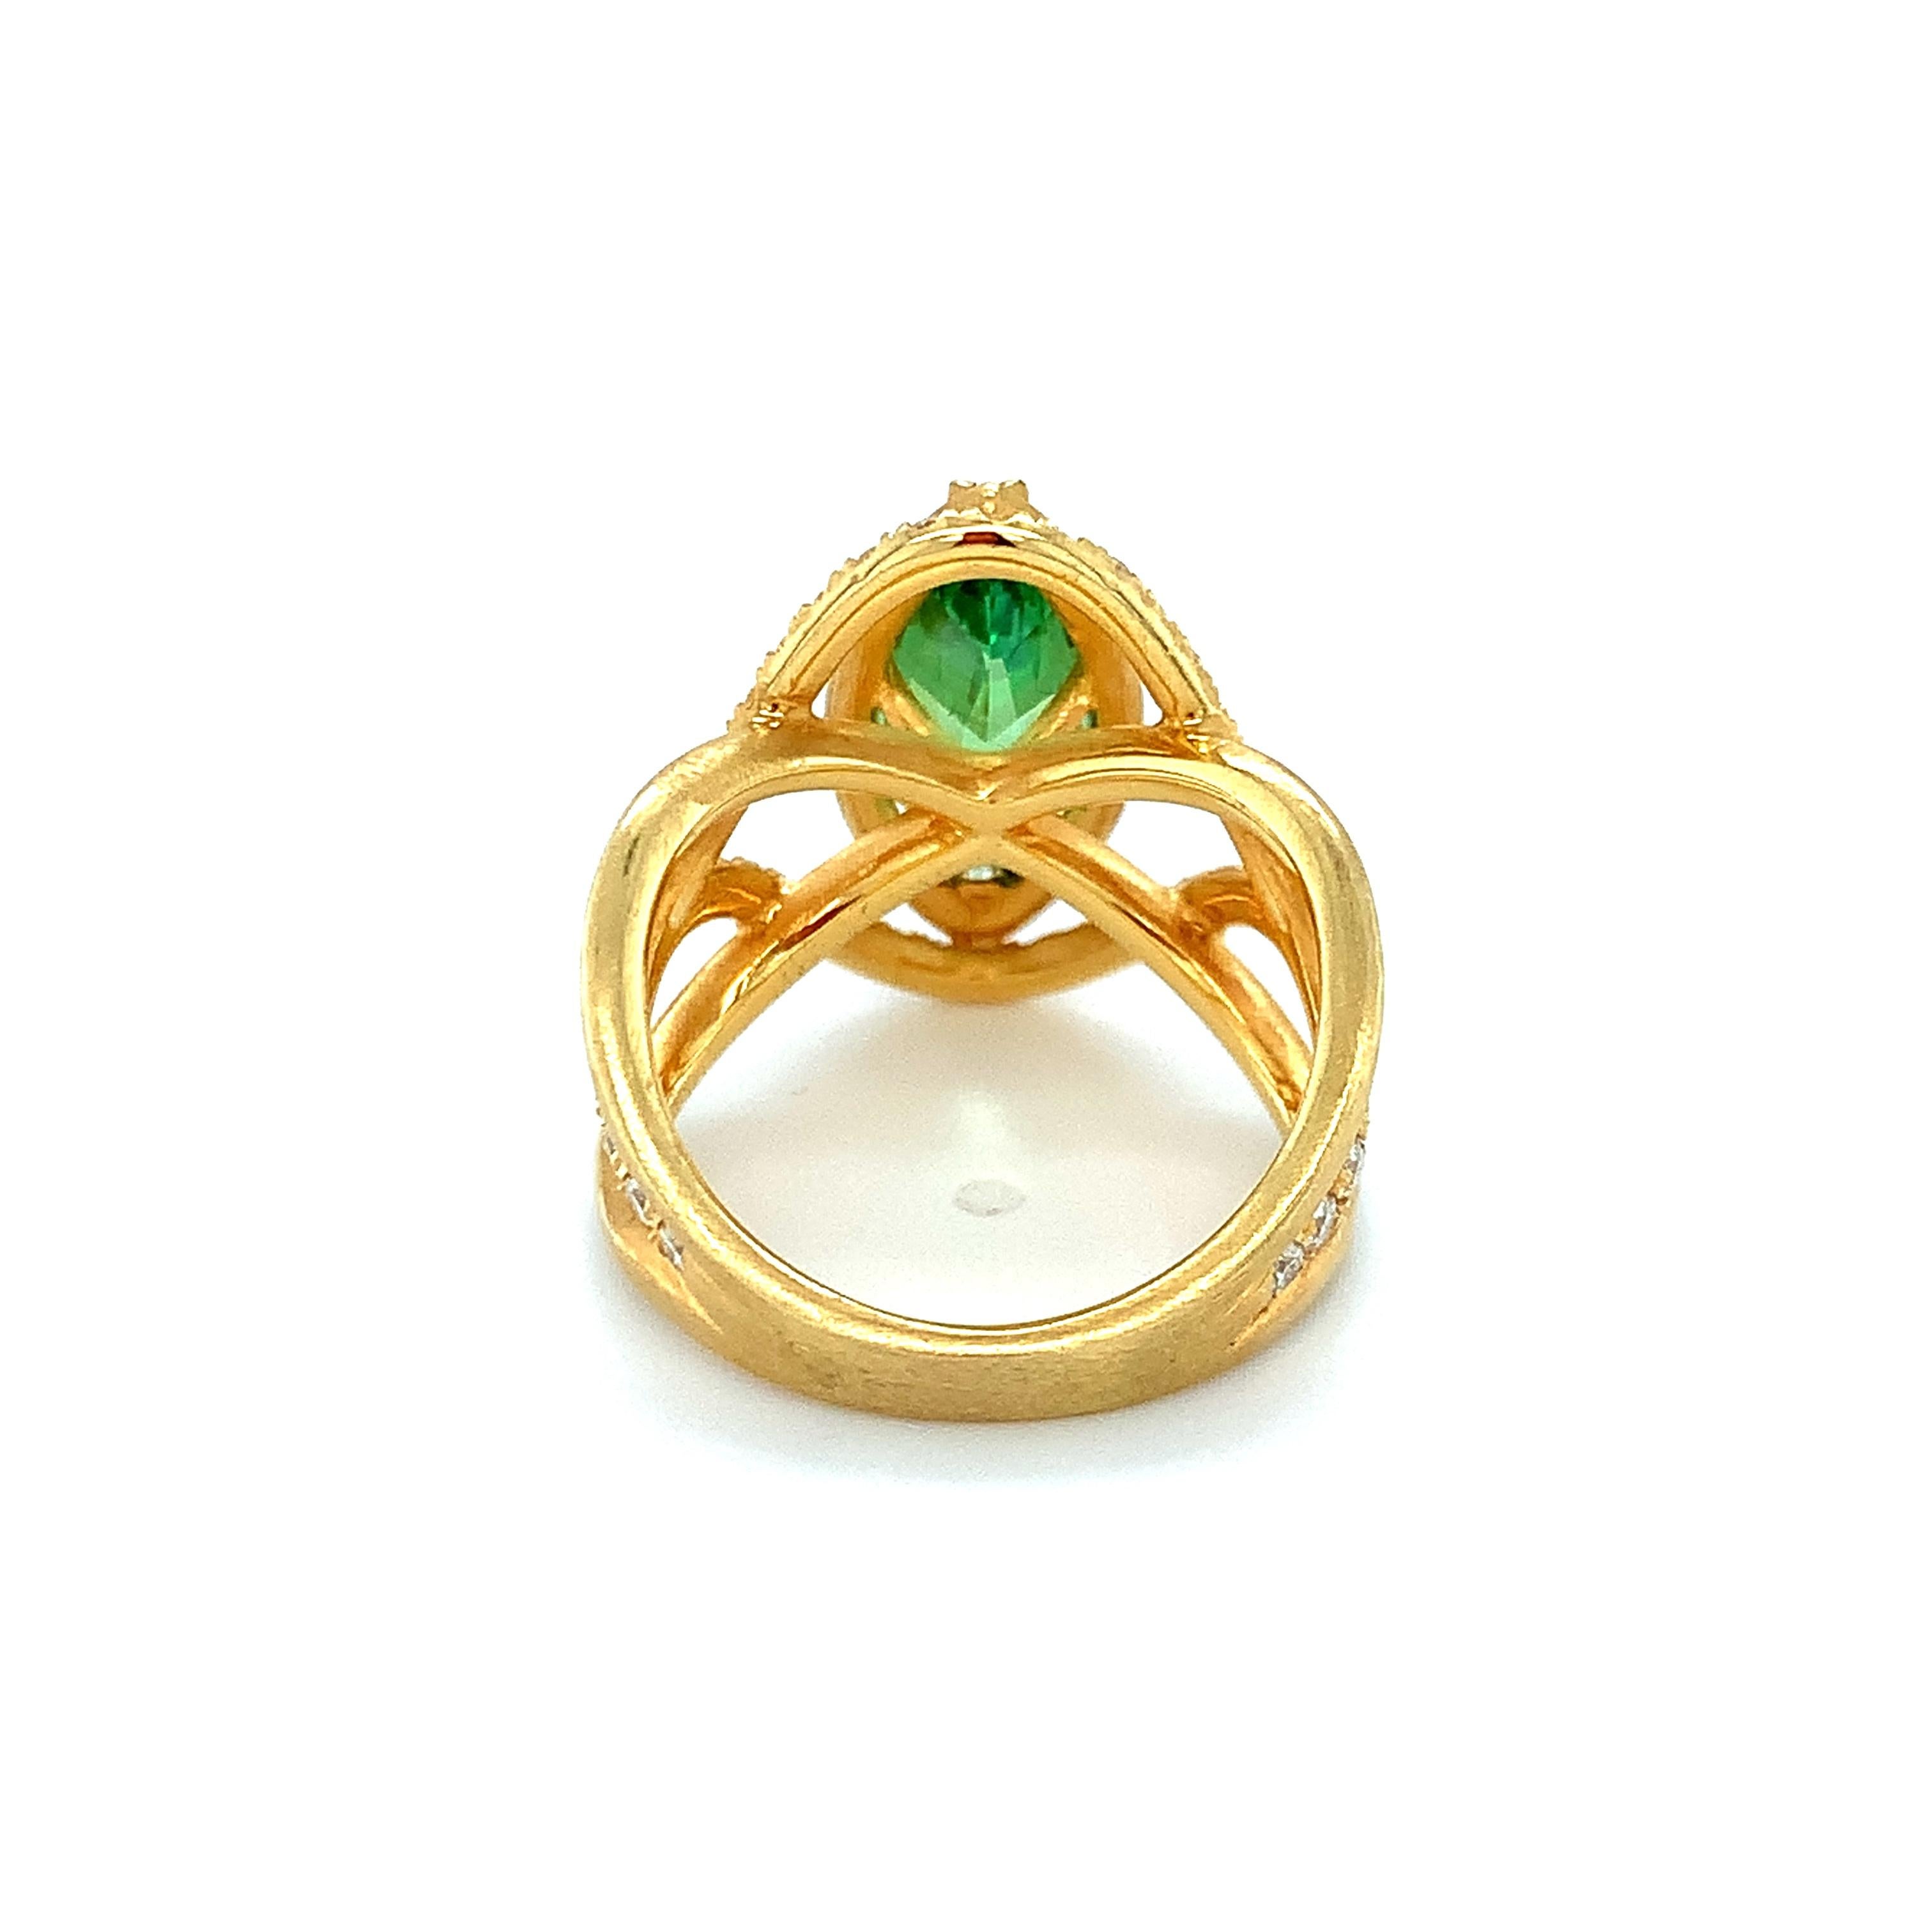 Tsavorite Garnet and Diamond Cocktail Ring in Yellow Gold, 2.95 Carats In New Condition For Sale In Los Angeles, CA